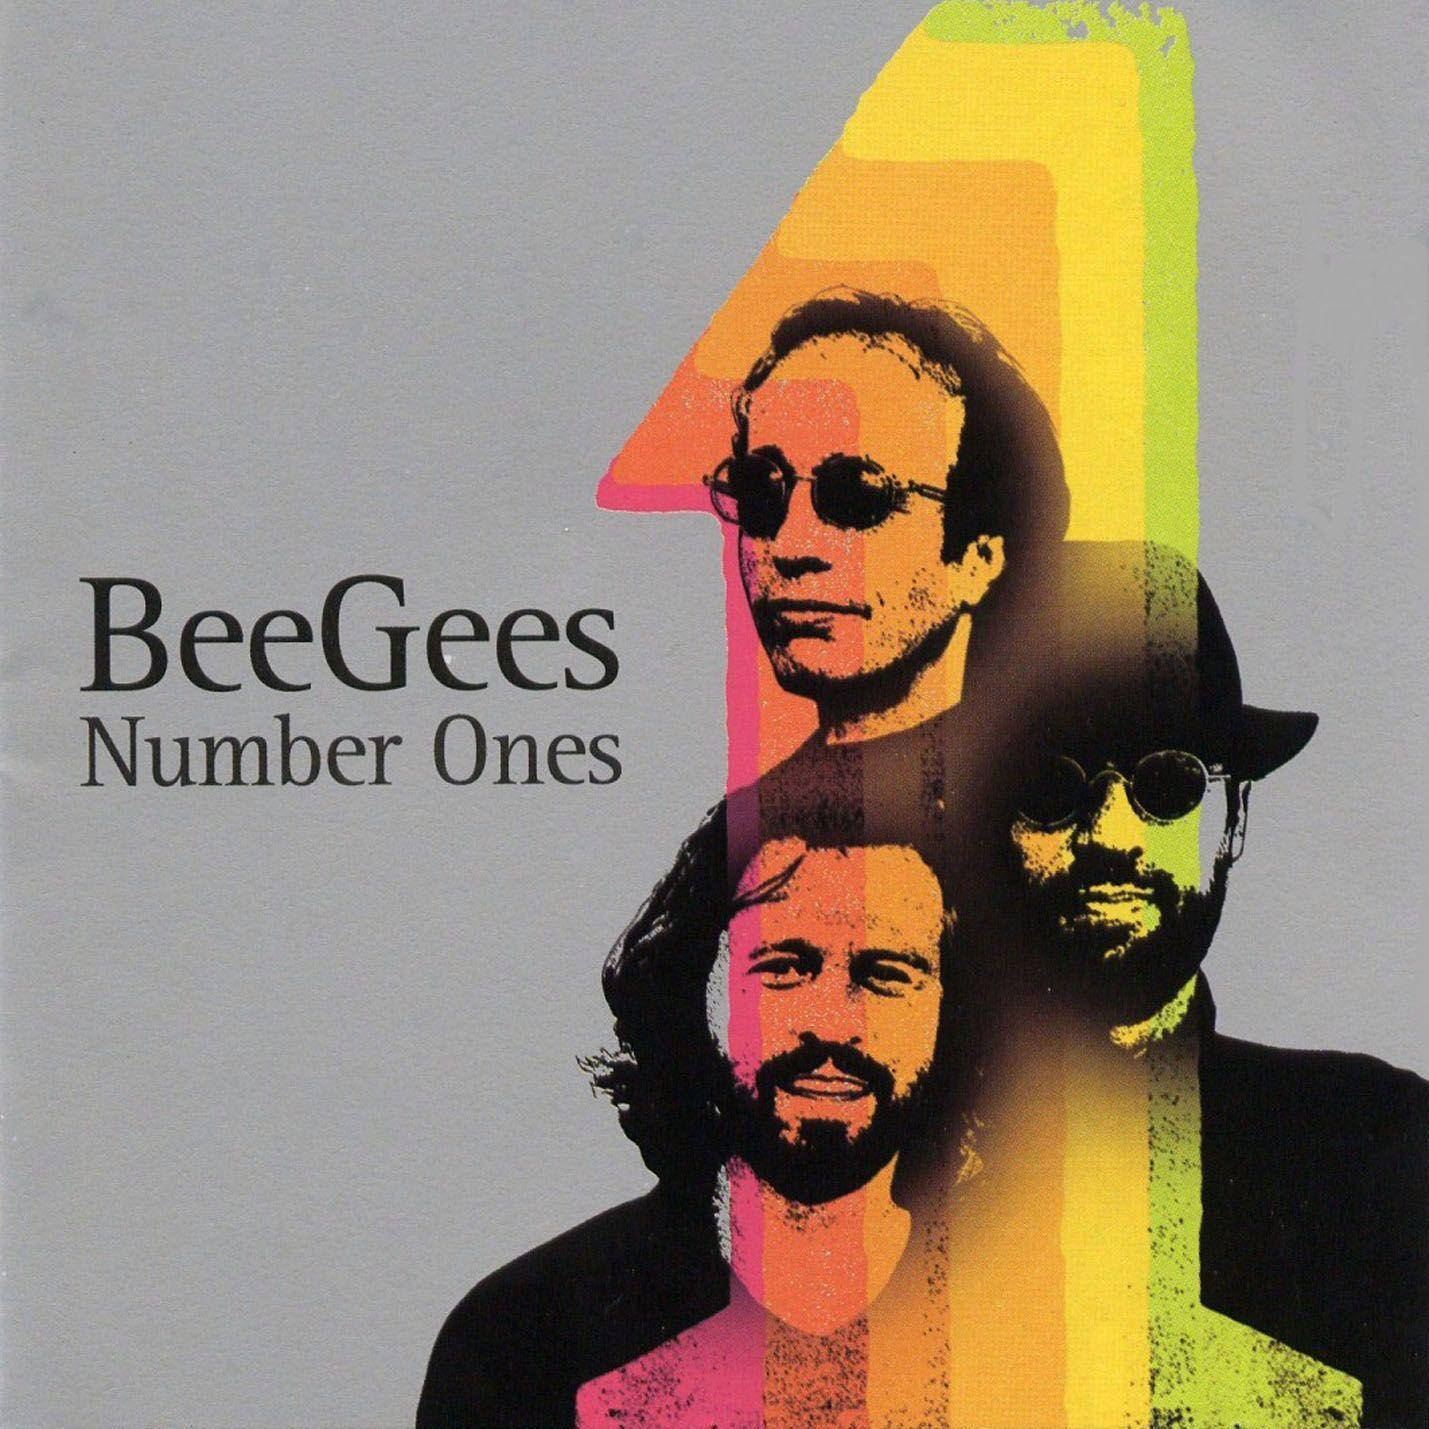 Bee Gees Number Ones Compilation Album Cover Wallpaper